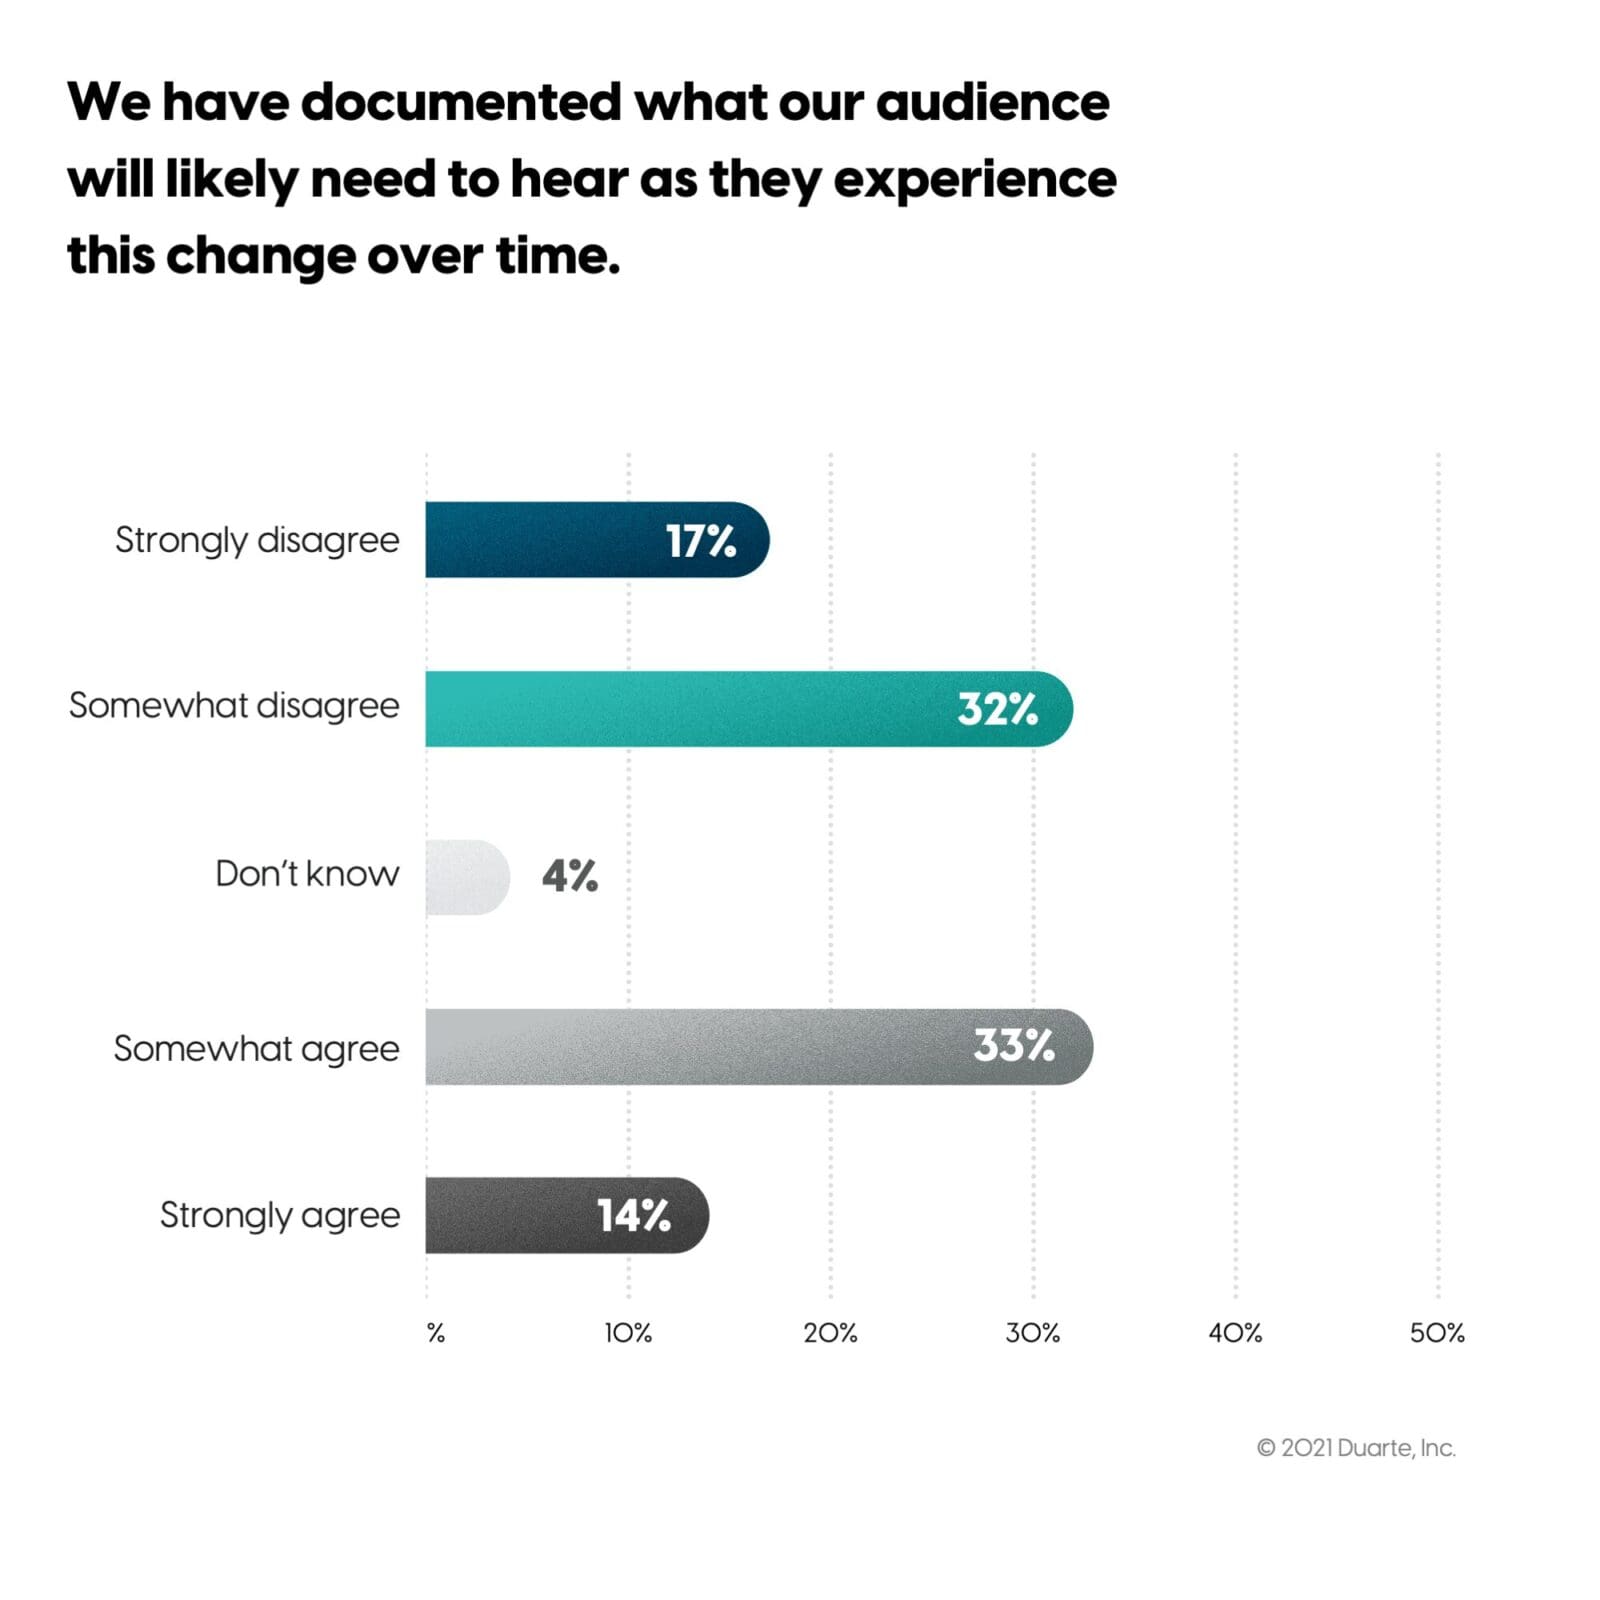 Survey results for question: We have documented what our audience will likely need to hear as they experience this change over time. Majority (33%) said they "Somewhat agree."